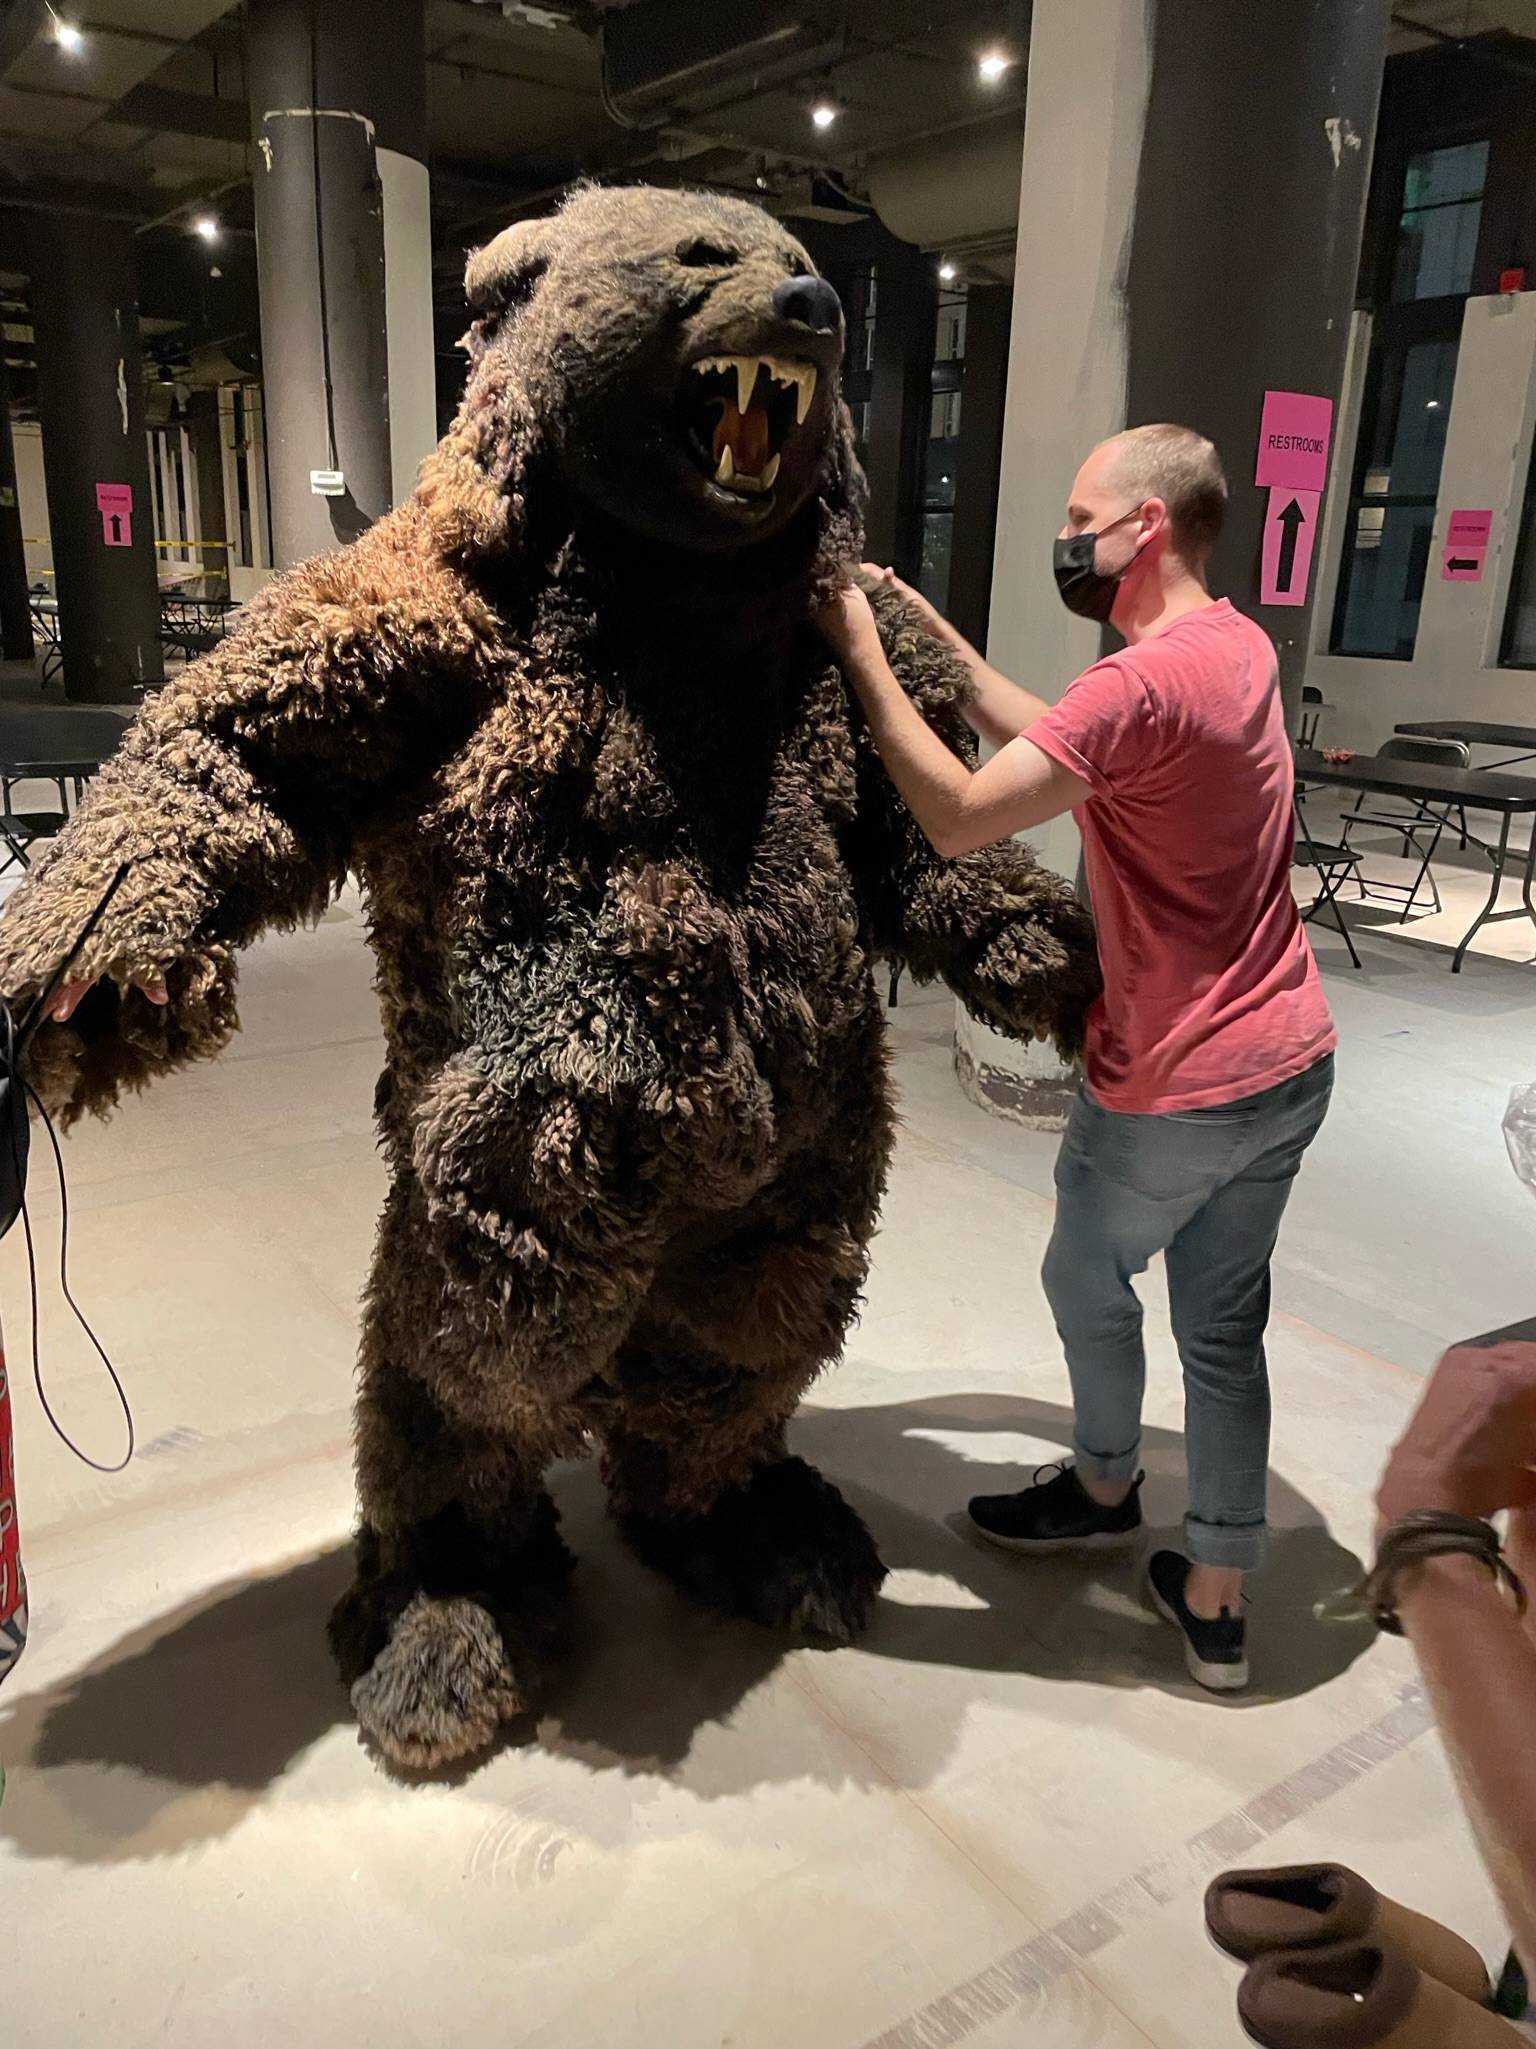 Behind the scenes costume design with Austin Pettinger of FX The Bear on Hulu.